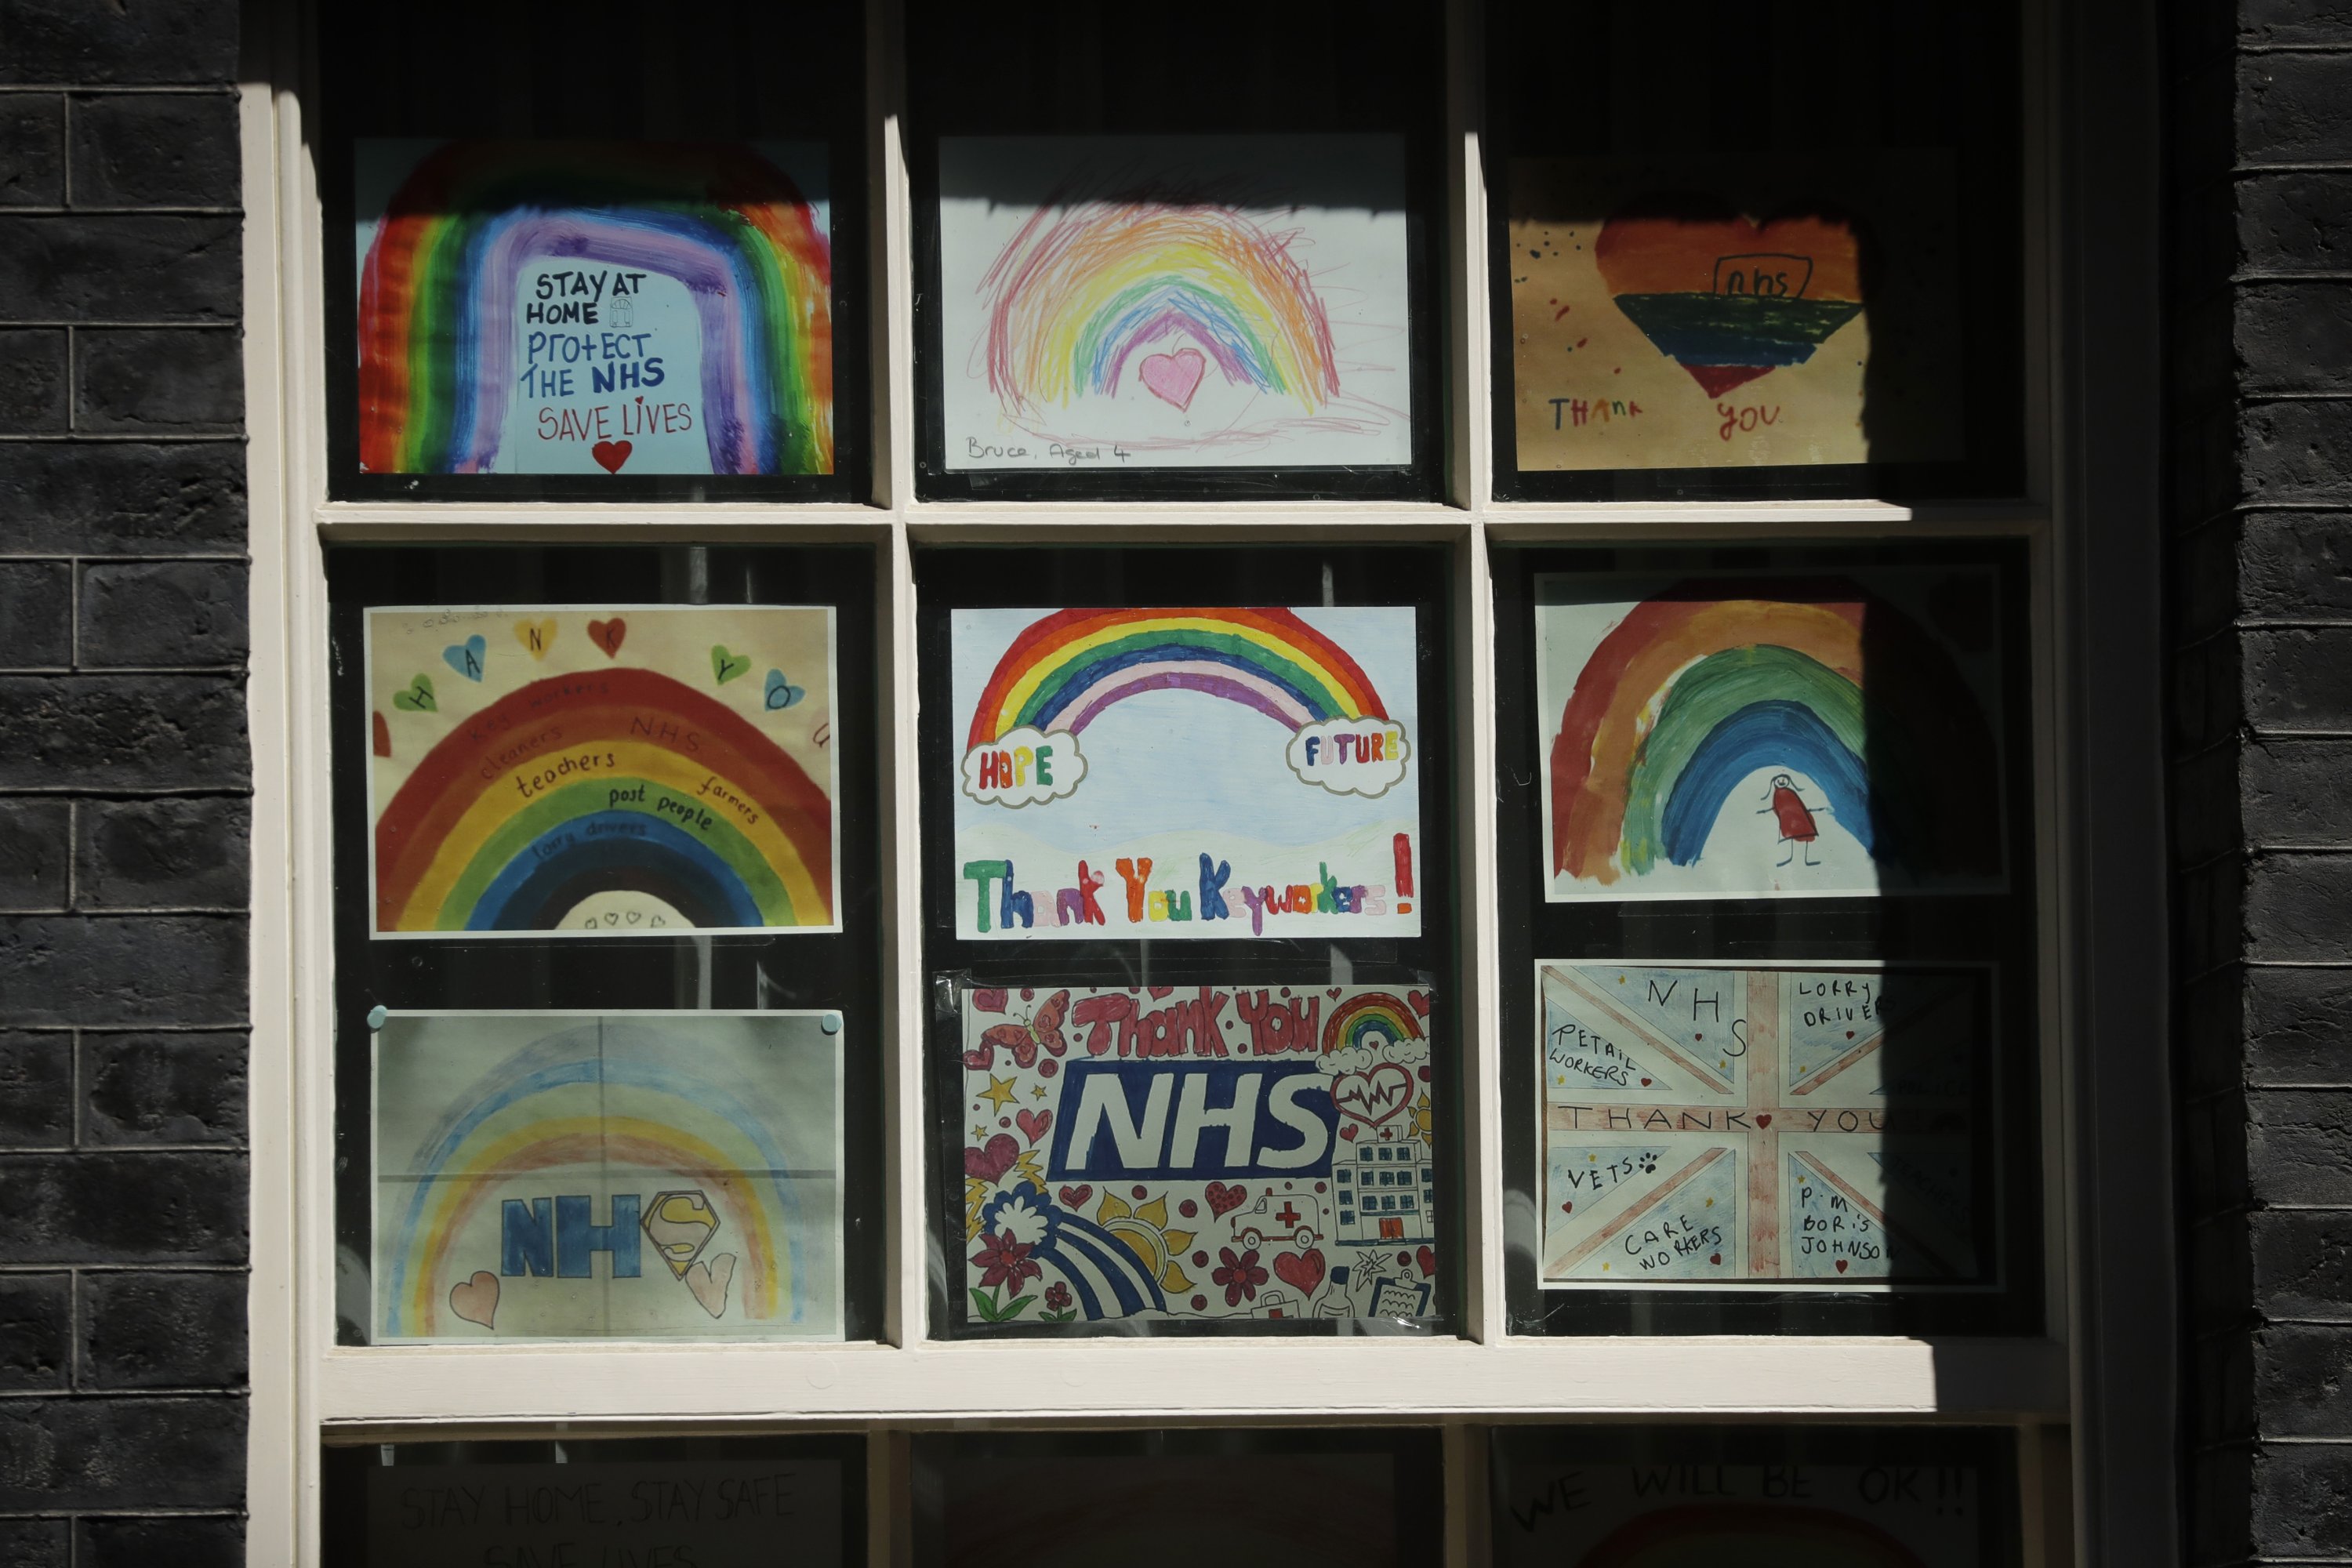 Coronavirus related artworks from children thanking the NHS (National Health Service) are displayed in one of the windows at 10 Downing Street in London, May 6, 2020.  (AP Photo)